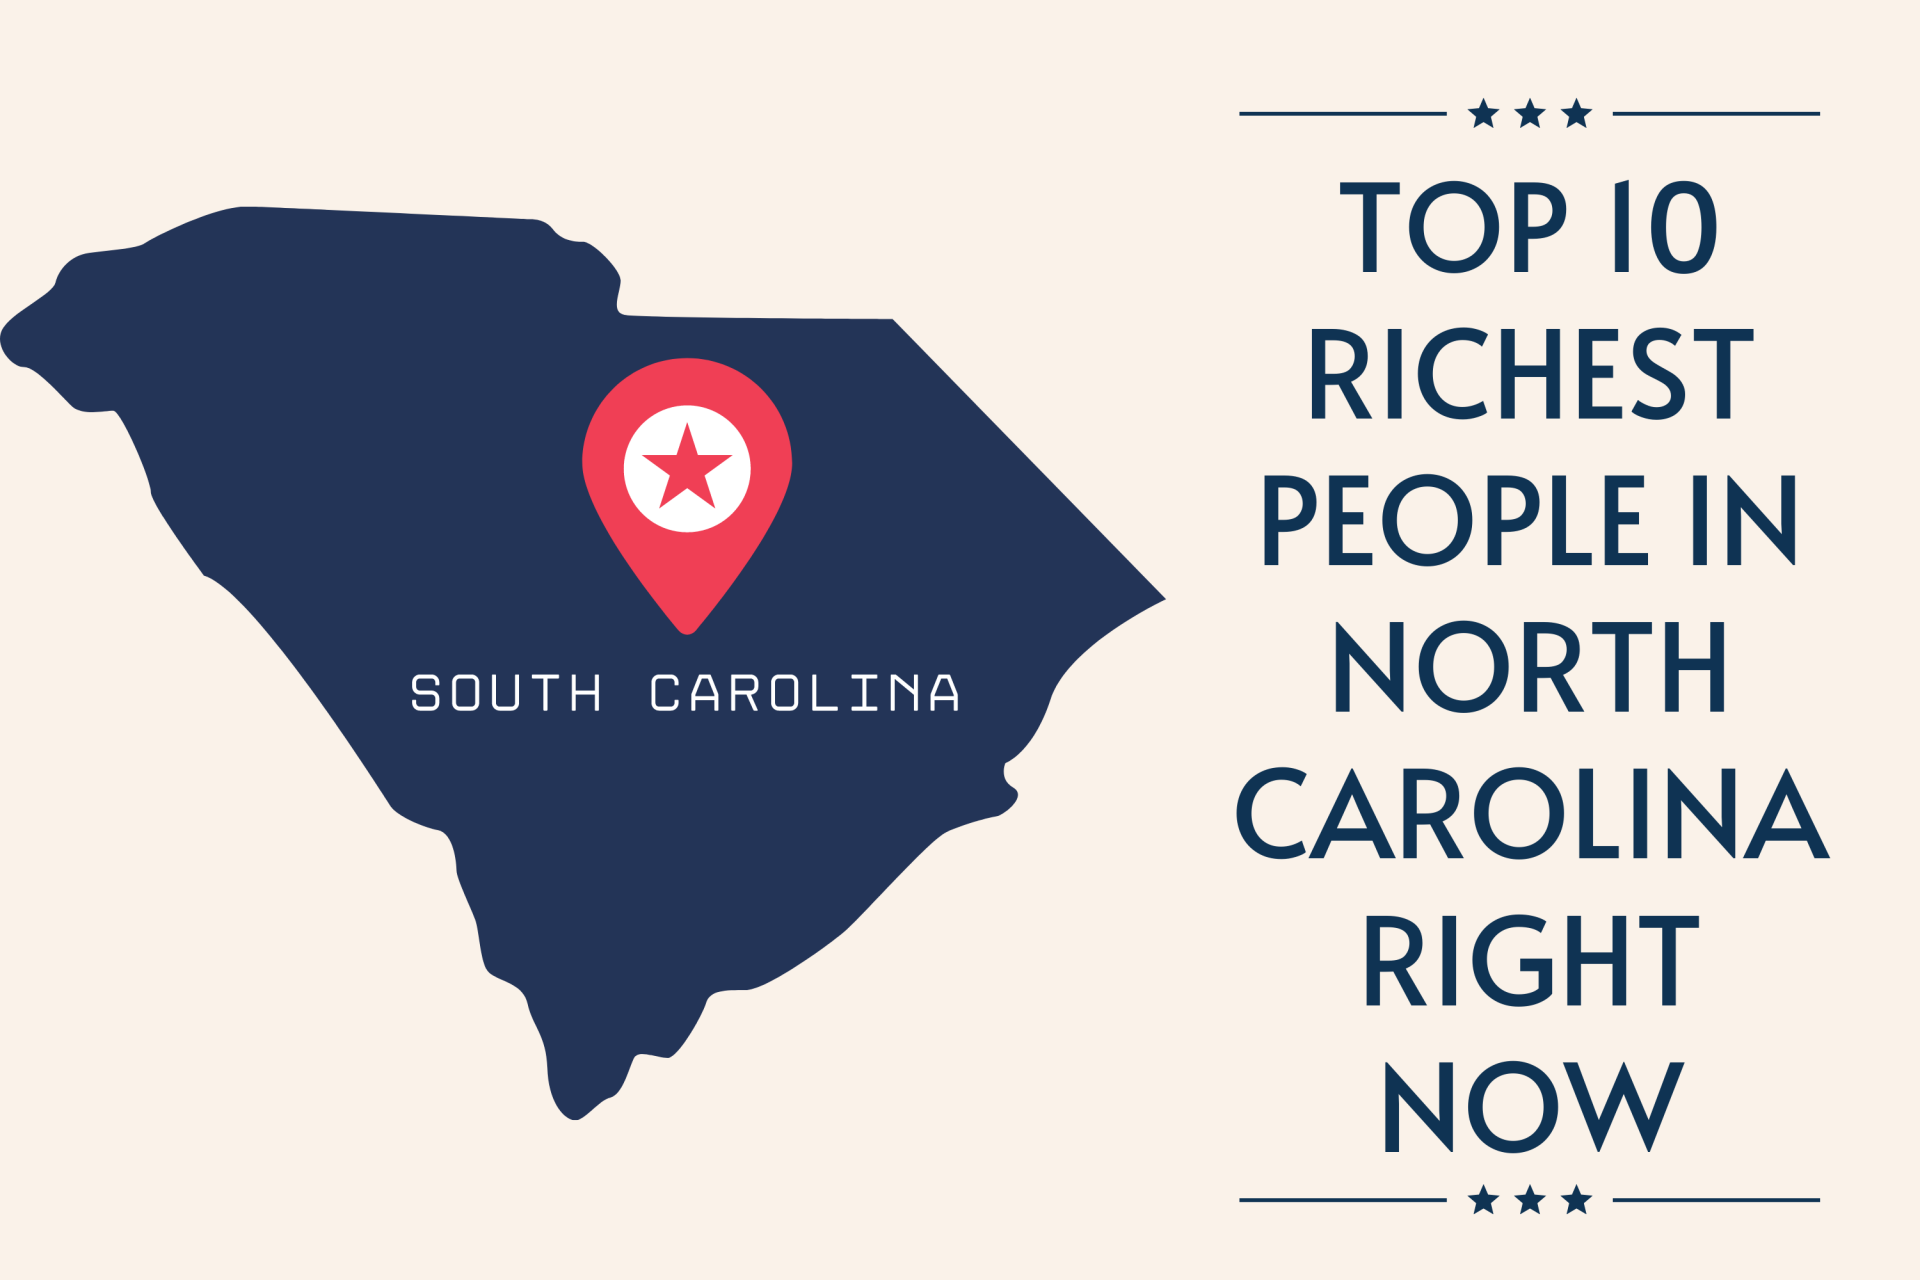 Top 10 Richest People in North Carolina Right Now